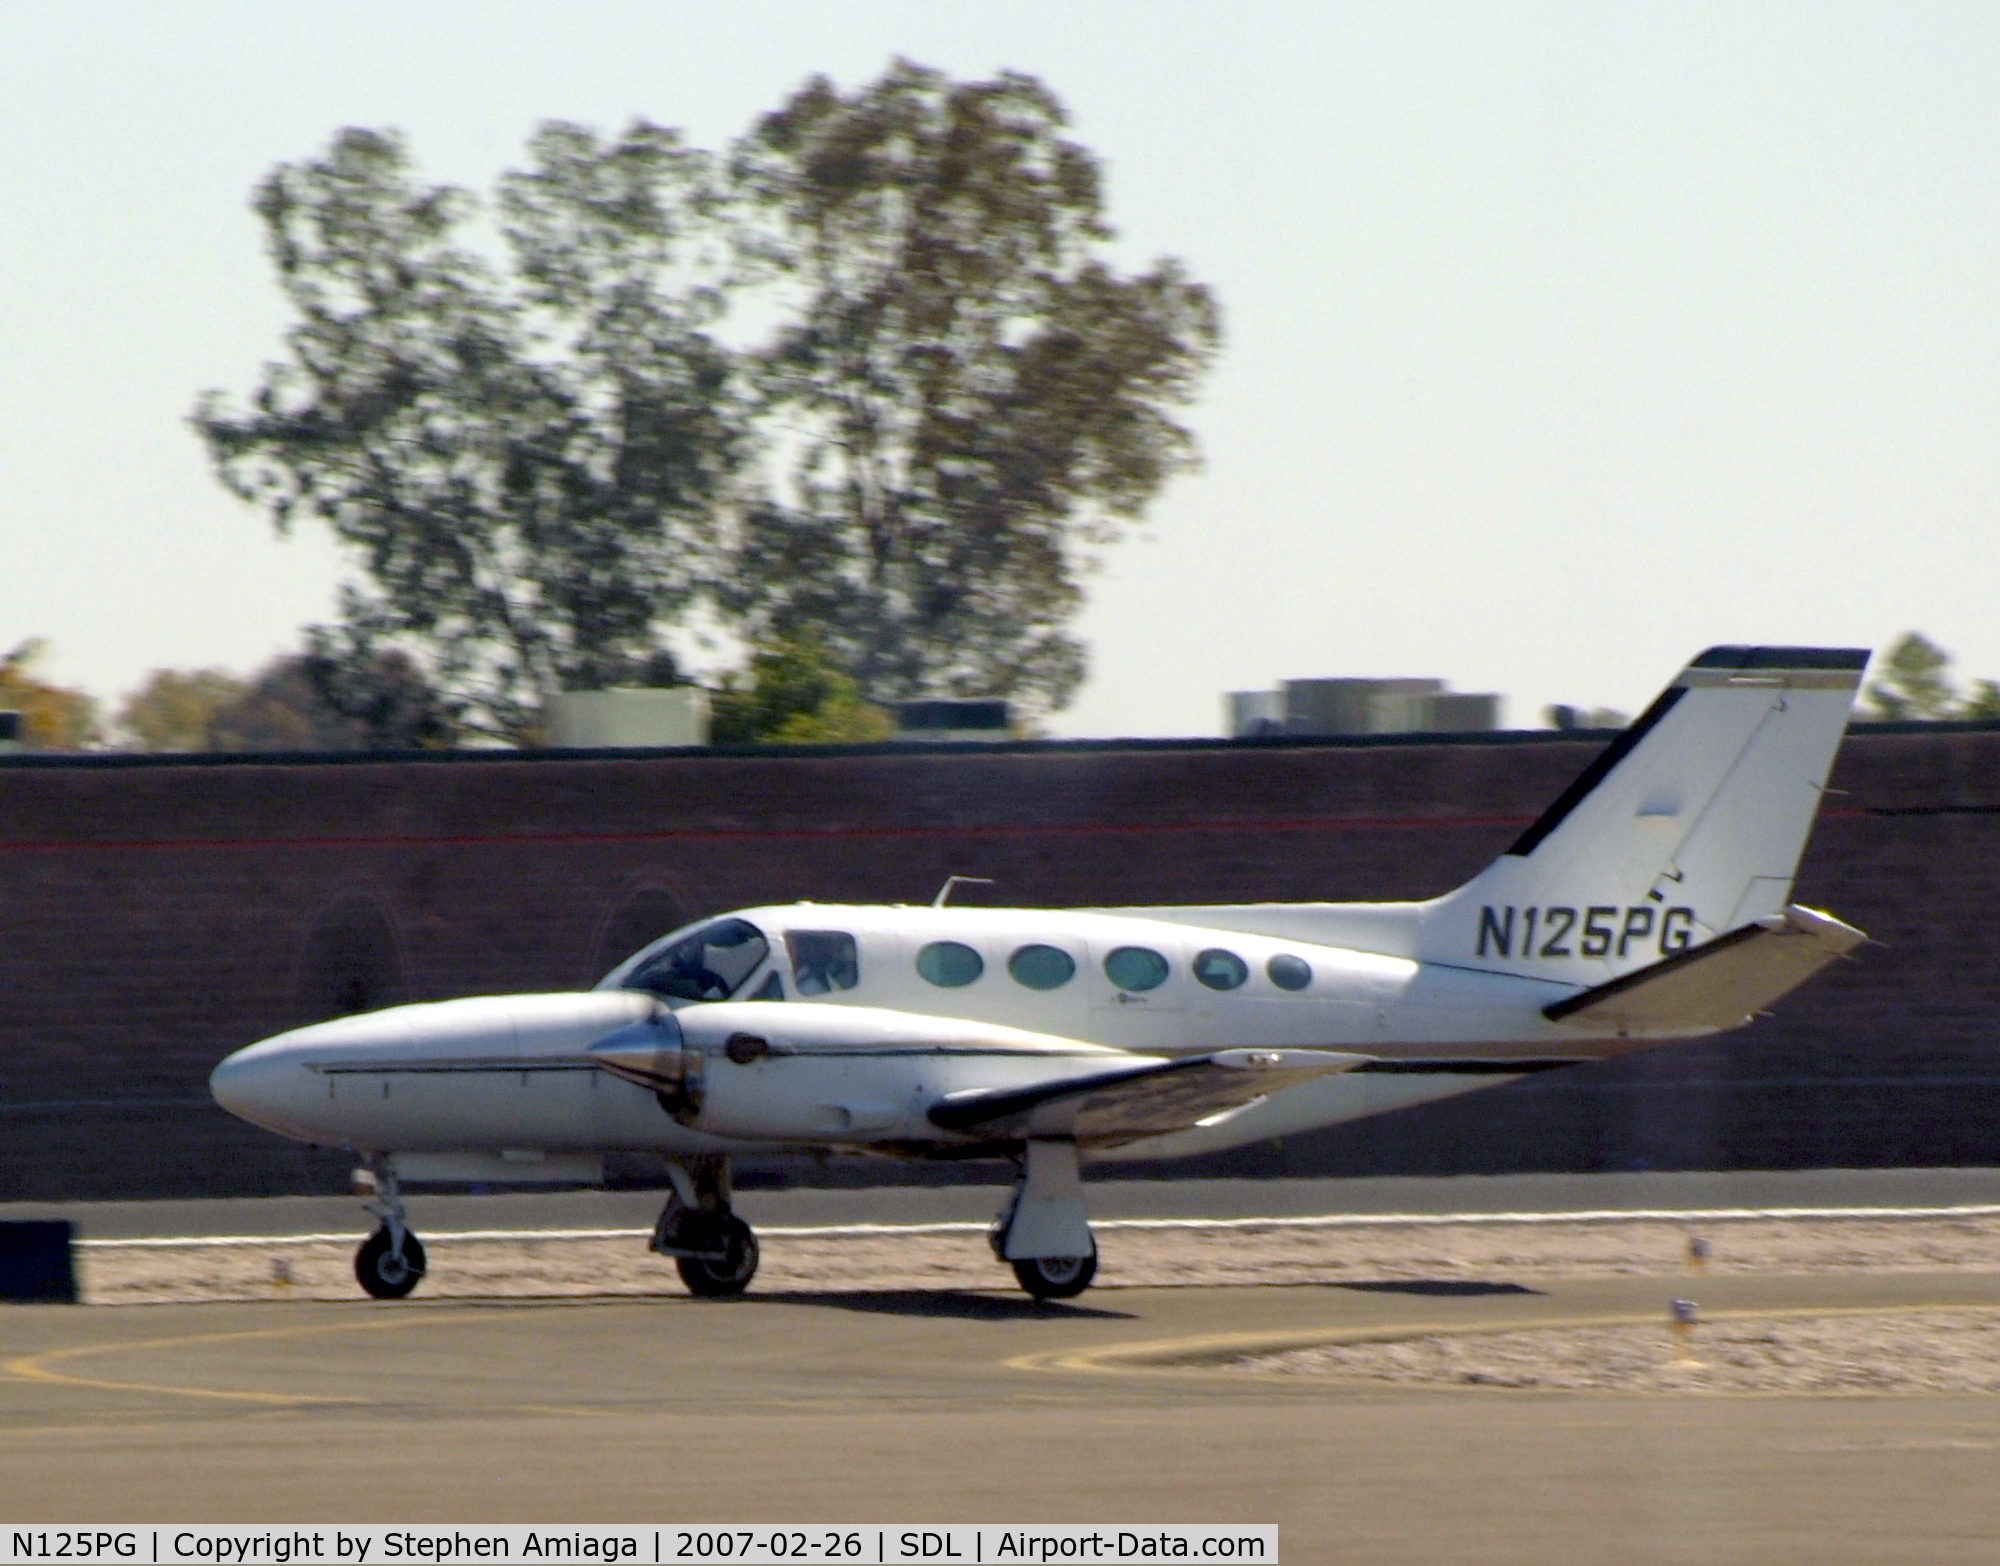 N125PG, 1981 Cessna 425 C/N 425-0125, 425 clear the active